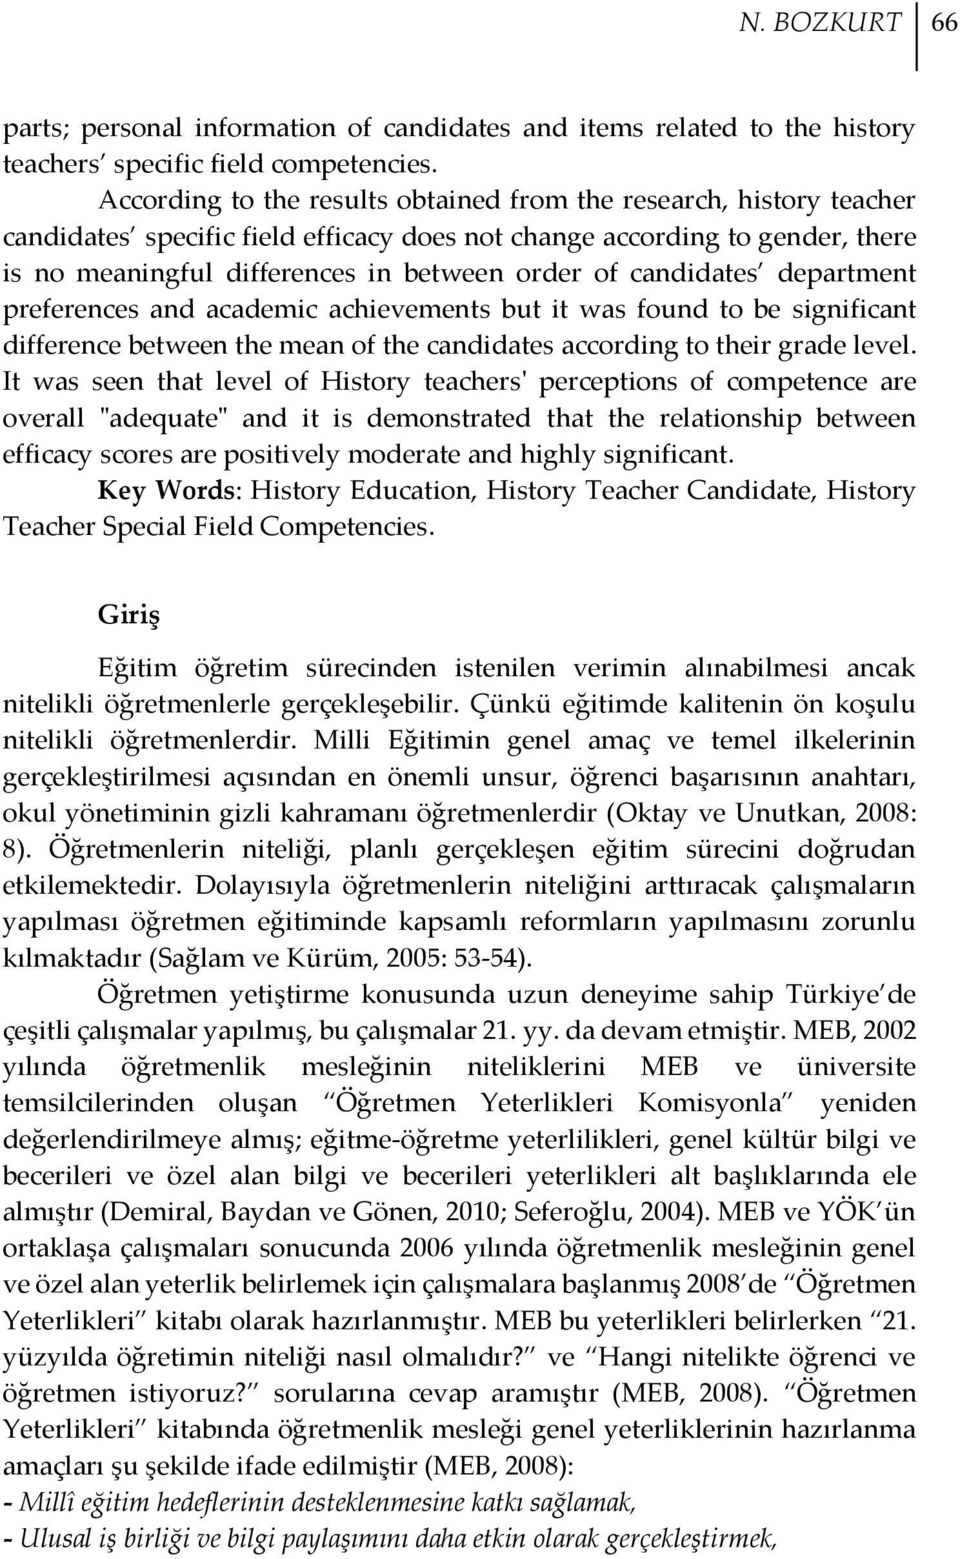 candidates department preferences and academic achievements but it was found to be significant difference between the mean of the candidates according to their grade level.